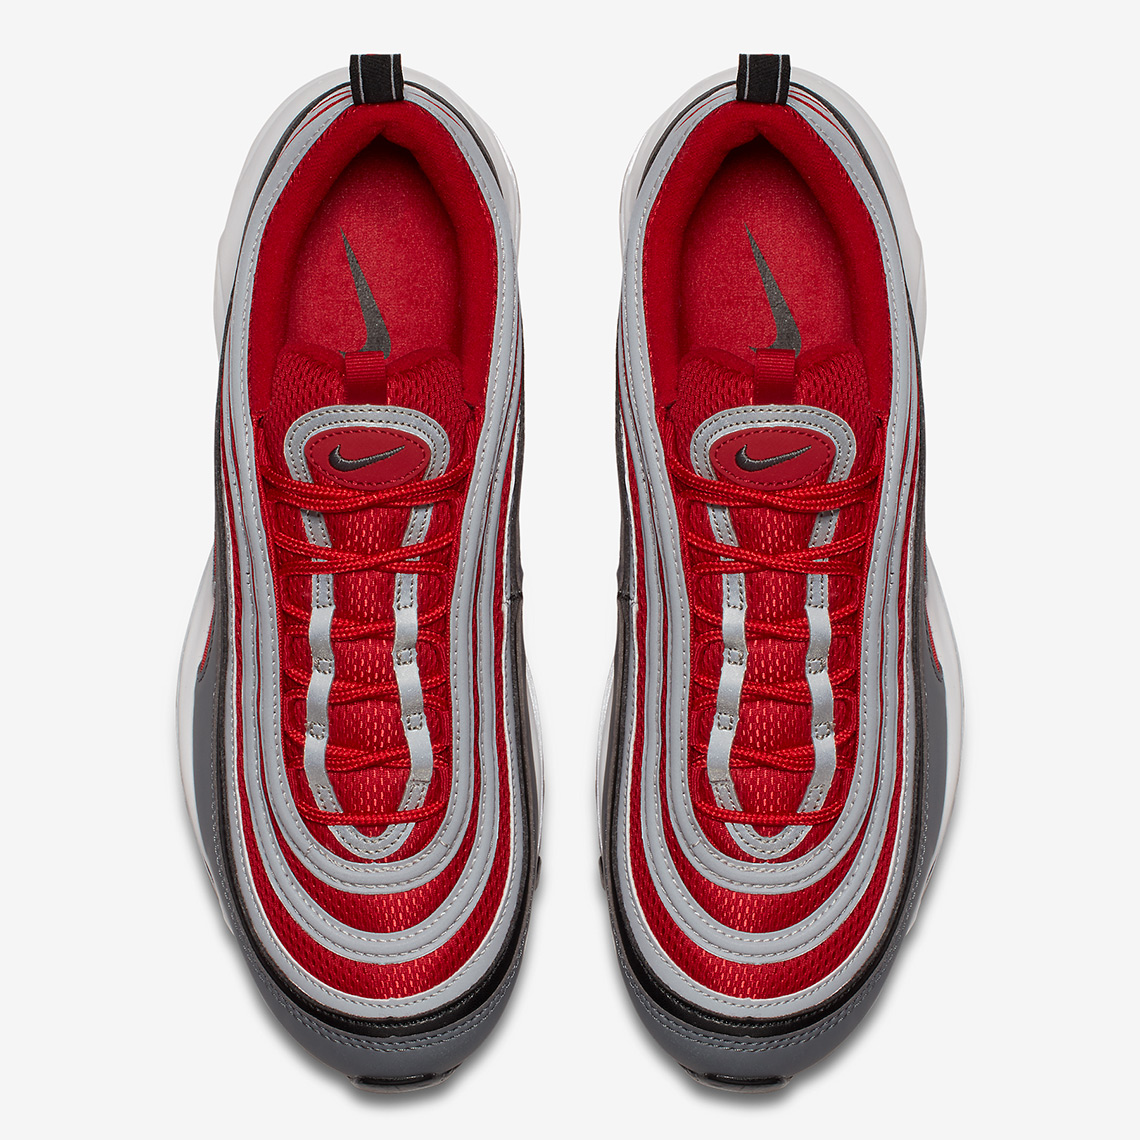 Nike Air Max 97 Gred Red 921826 007 Release Info 7